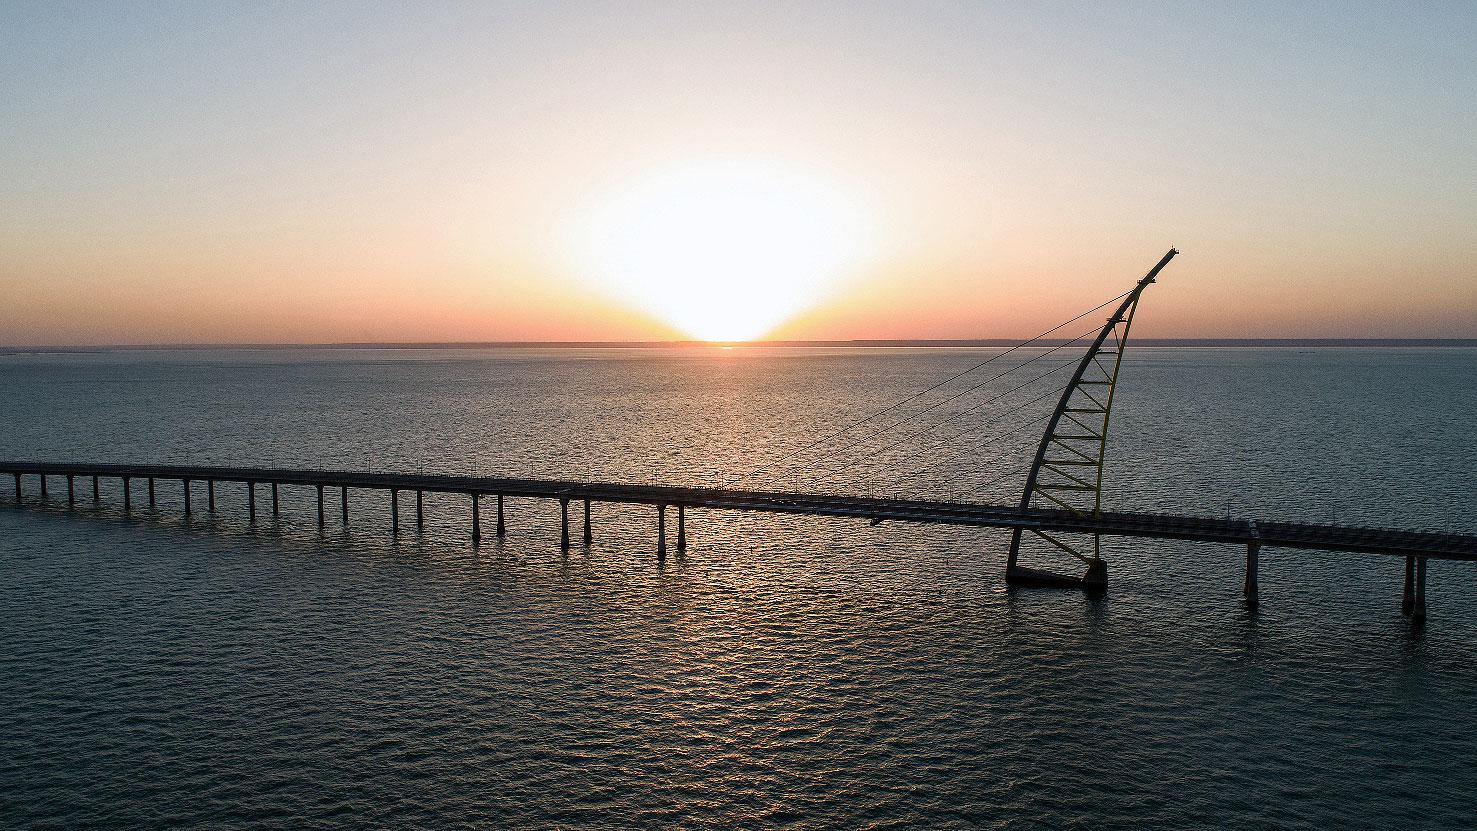 Sunset view of the arch pylon on the Sheikh Jaber al-Ahmad Al-Sabah Causeway which will lead to the Future Silk City